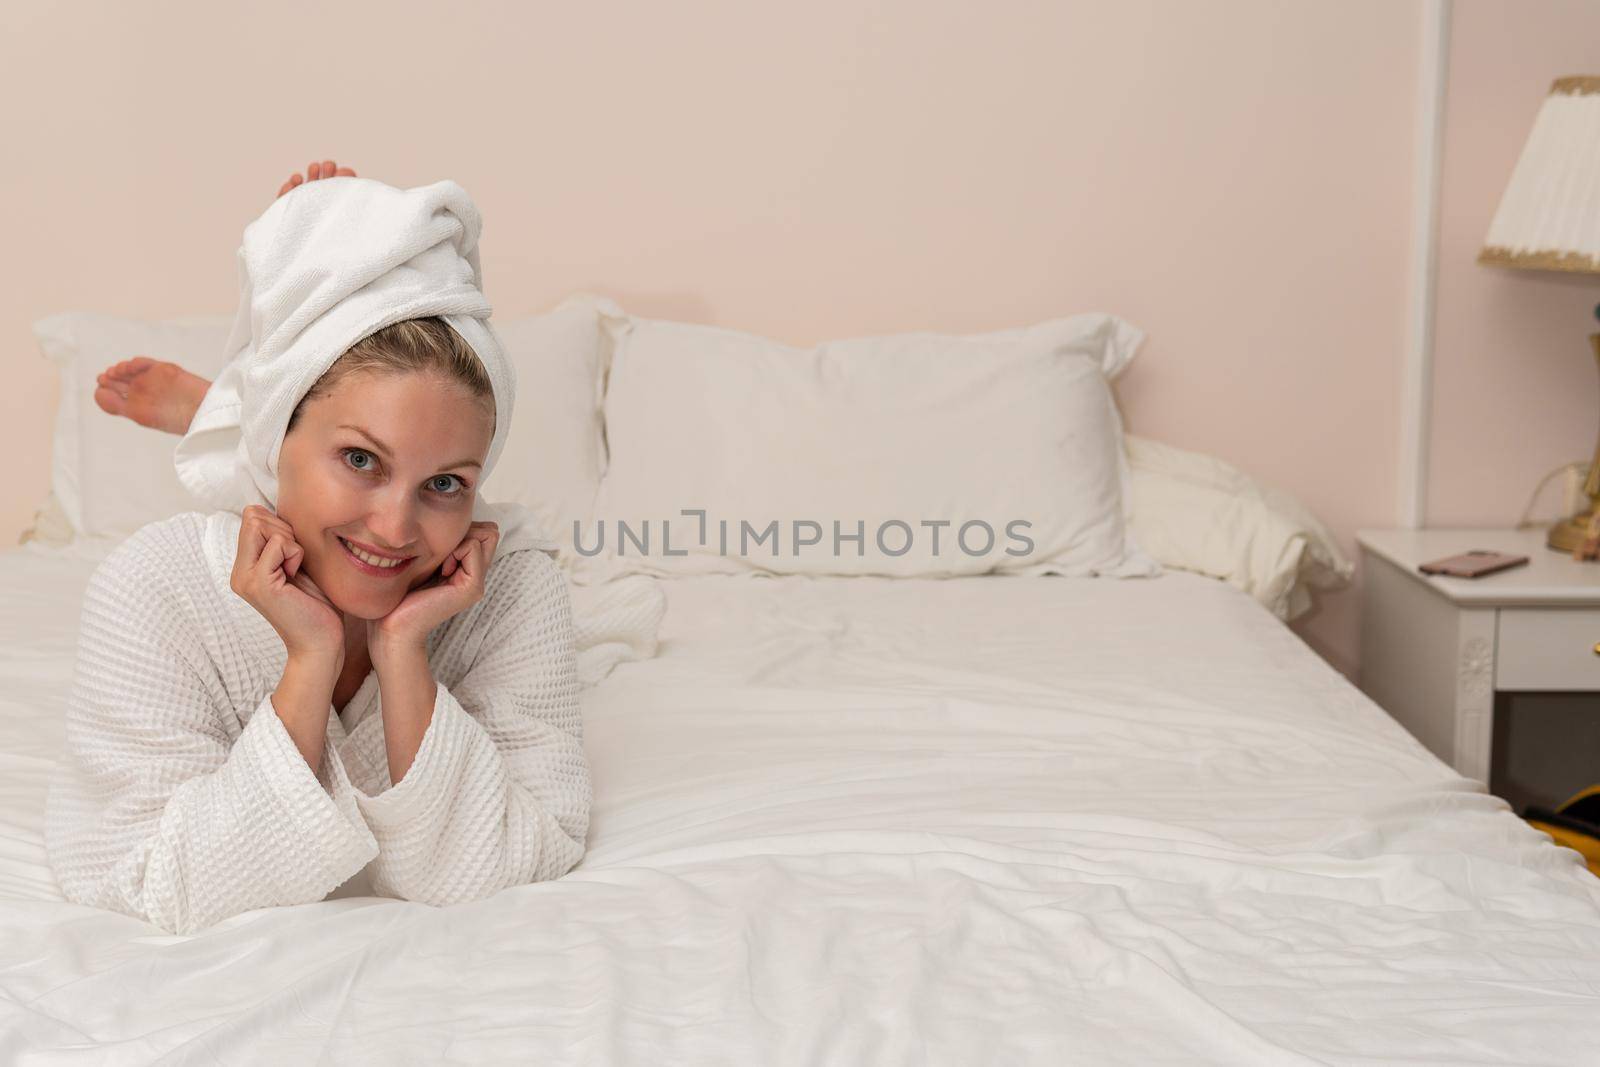 Bed copyspace beauty spa bathrobe female care body bathroom white, for preparing woman from clean and towel relaxation, gown dressing. Hygiene people american, by 89167702191